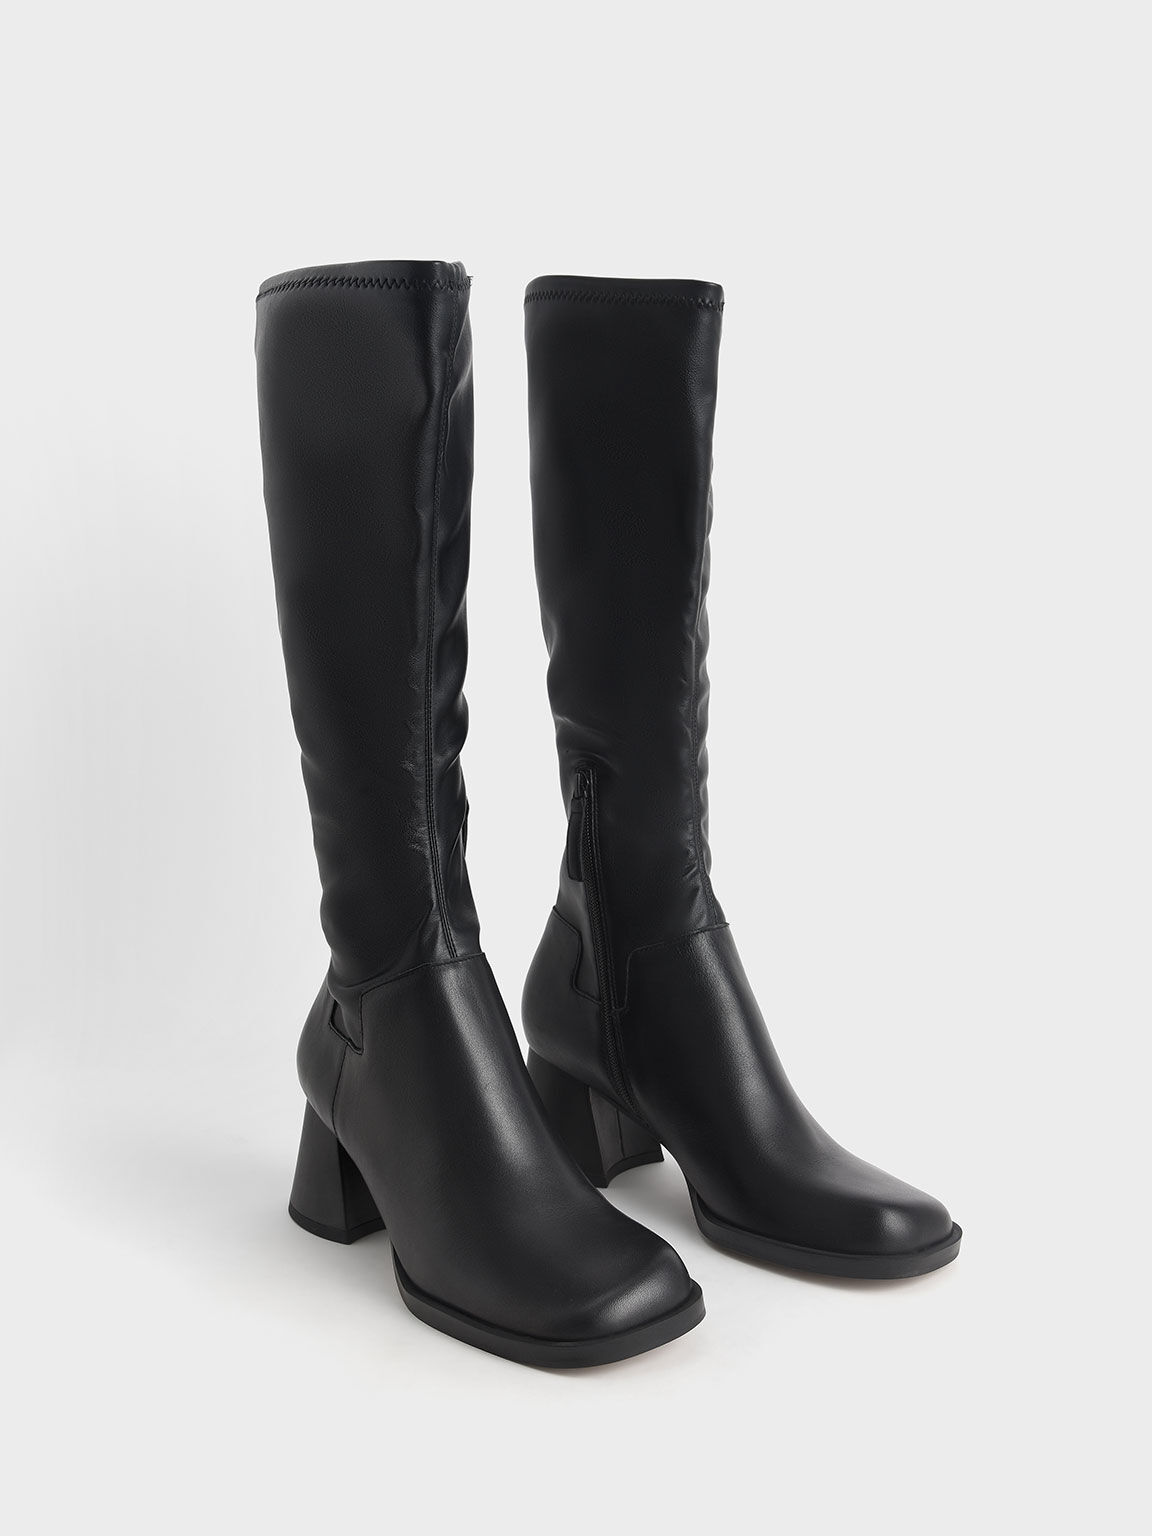 Leather Knee-High Boots, Black, hi-res